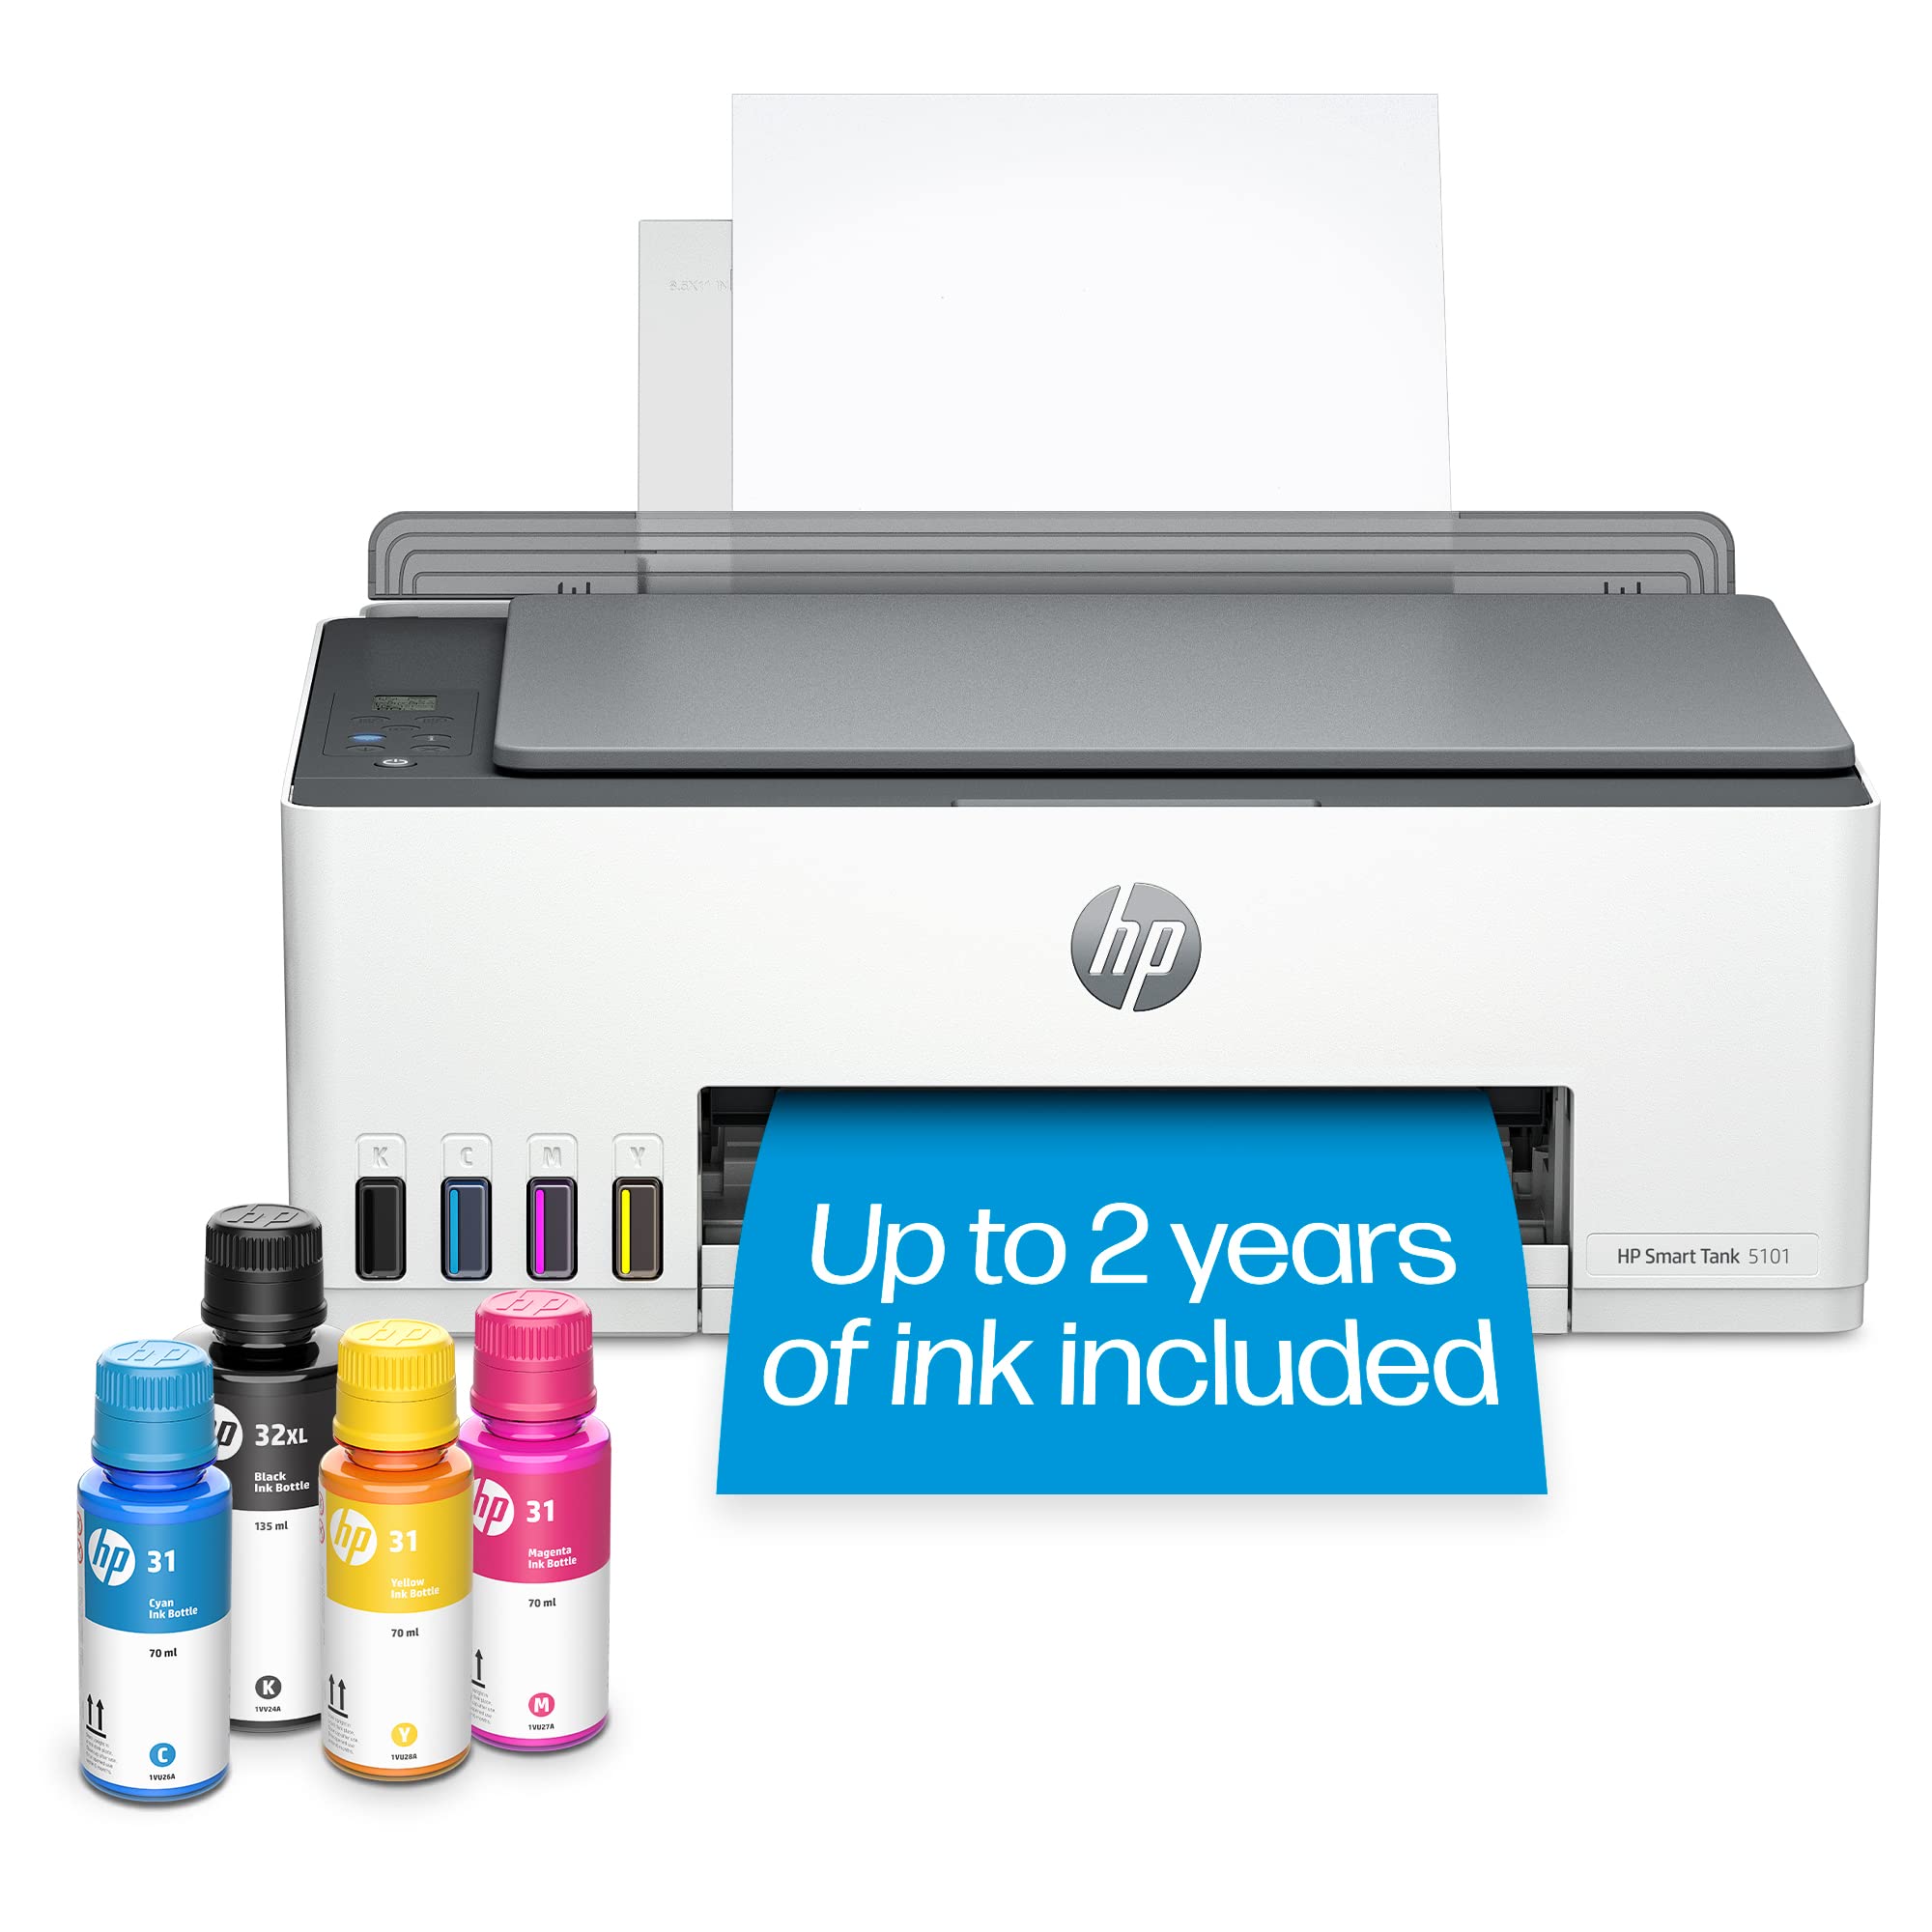 HP Smart Tank 5101 Wireless All-In-One Supertank Inkjet Printer w/ up to 2 Years of Ink Included $170 + Free Shipping